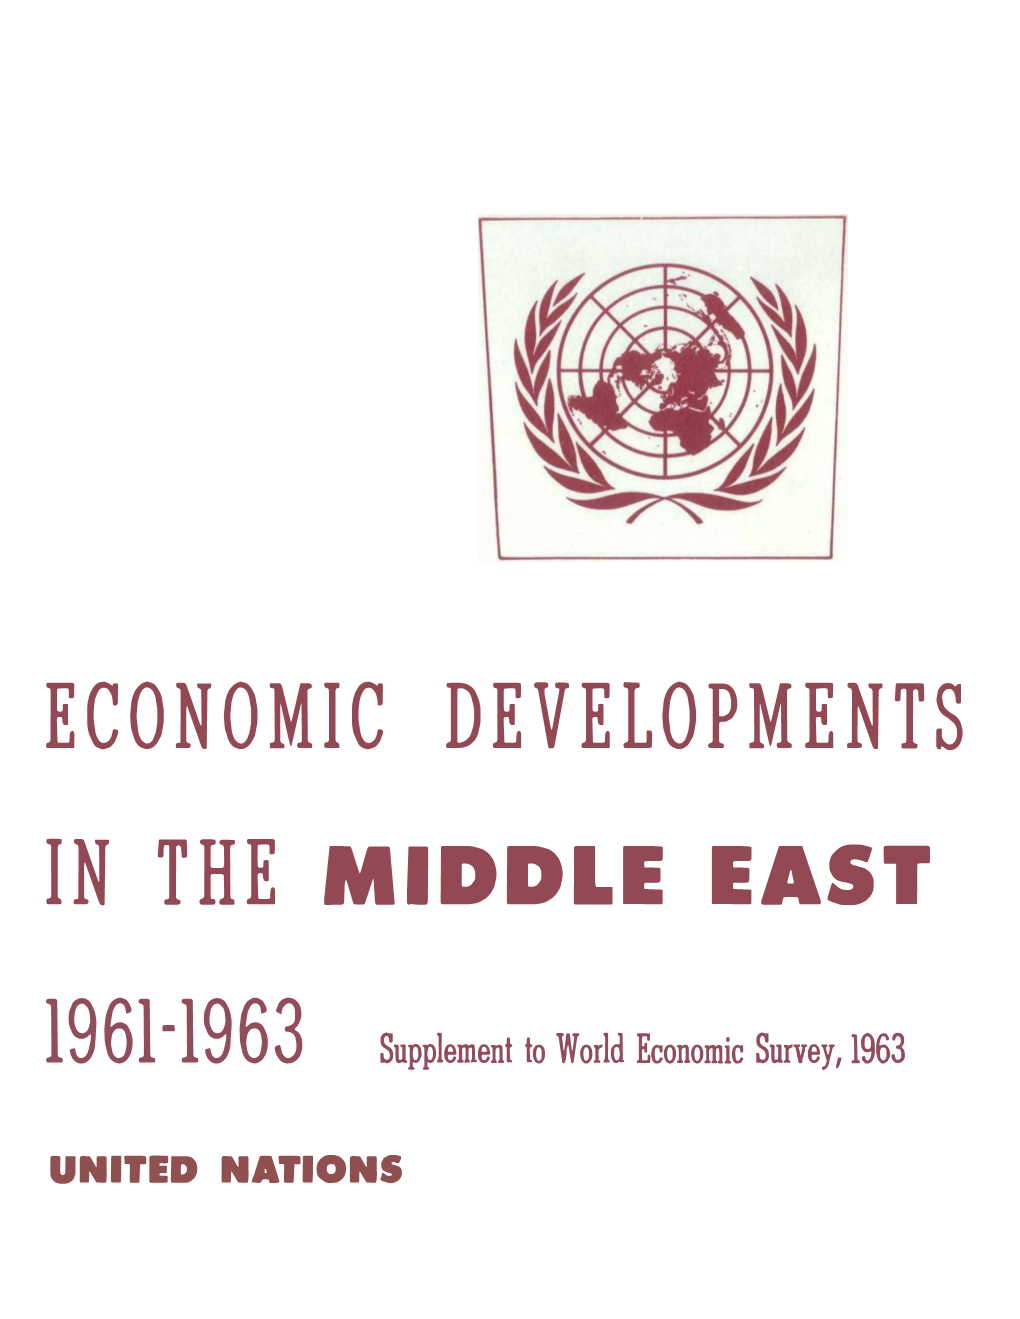 IN the MIDDLE EAST 19 61-19 6 3 Supplement to World Economic Survey, 1963